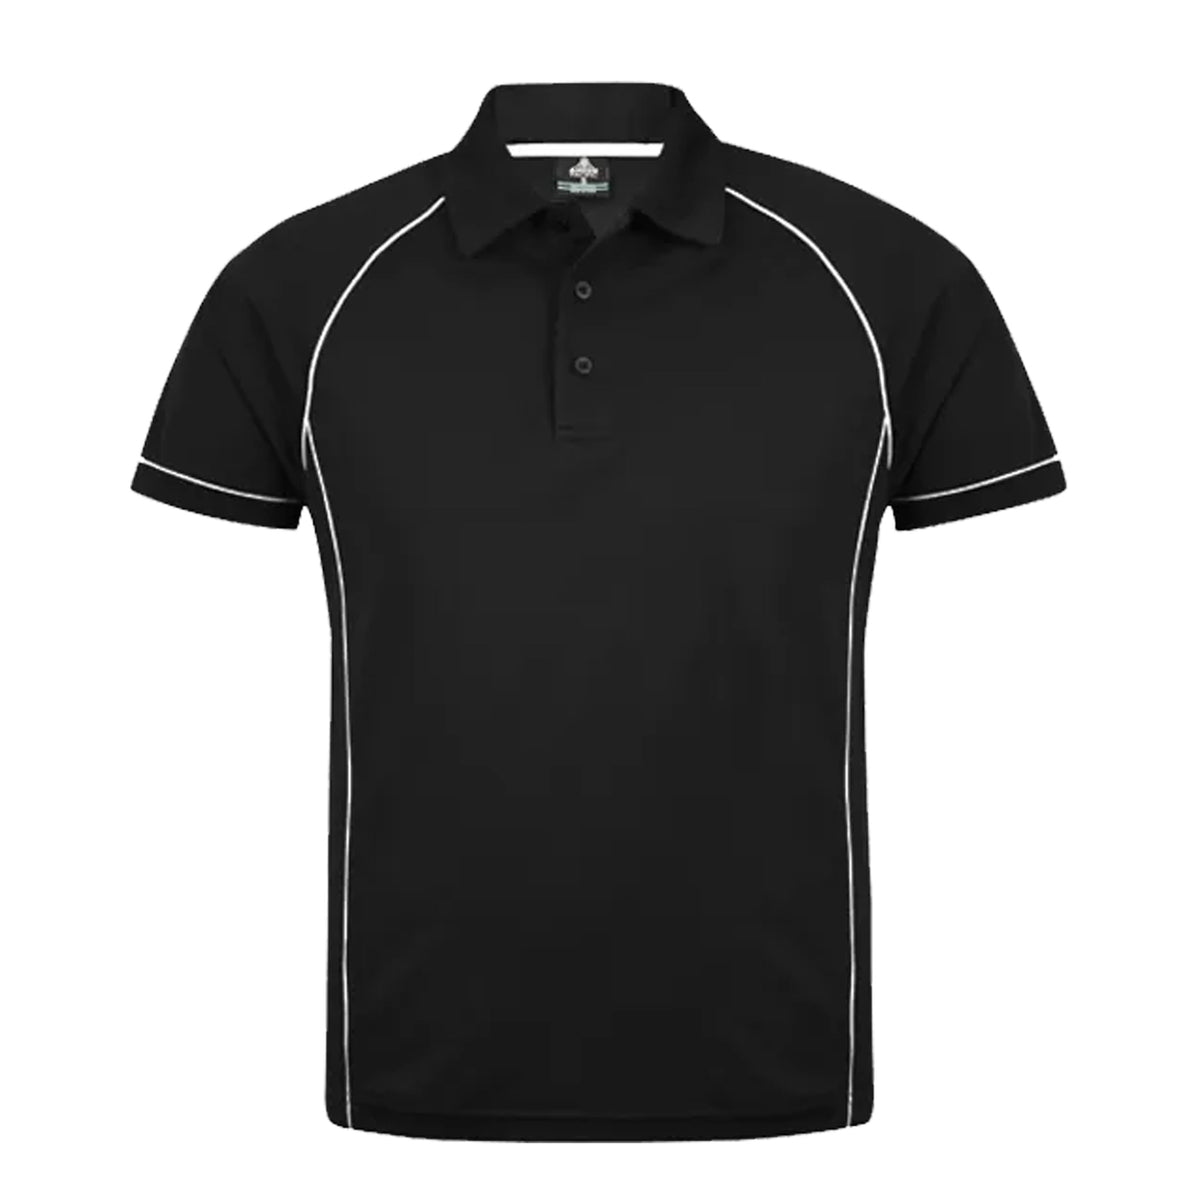 aussie pacific endeavour polos in black white